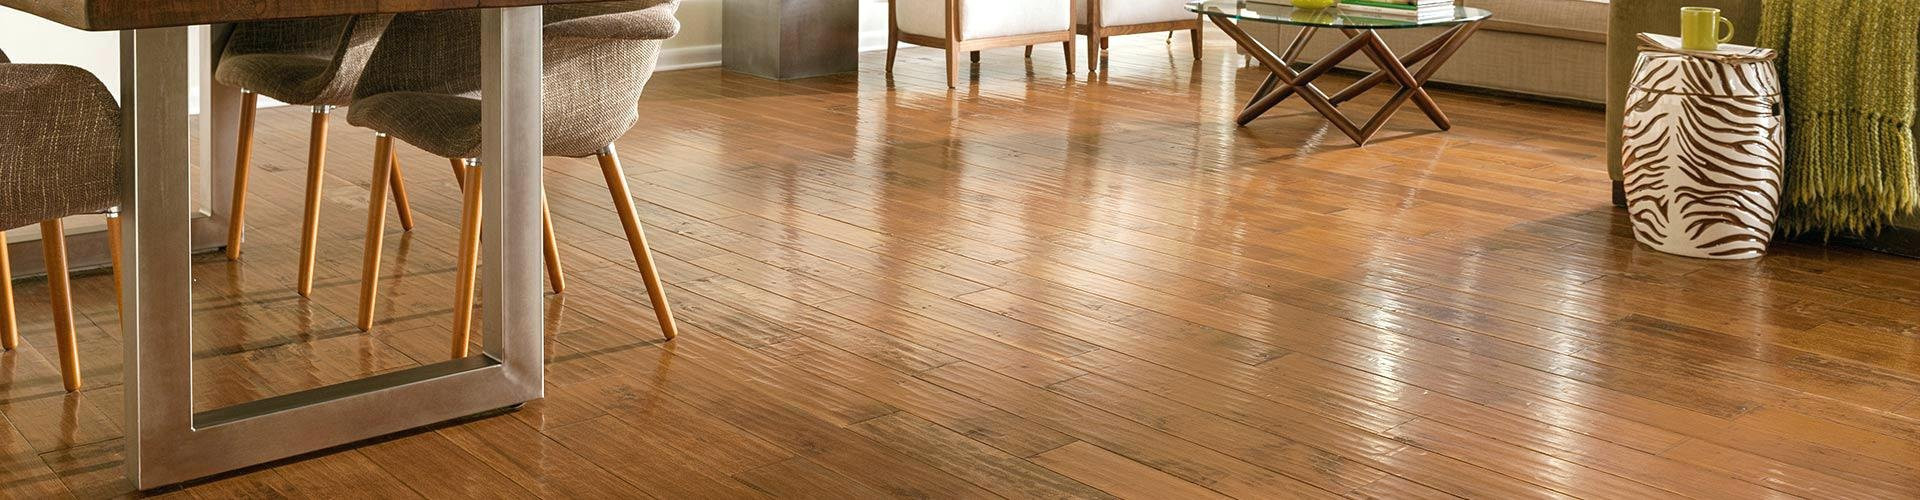 29 Nice Bamboo Hardwood Flooring Pros and Cons 2024 free download bamboo hardwood flooring pros and cons of https missing person search com ceramic tile that looks like wood at intended for ceramic tile that looks like wood at lowes lovely od grain tile ba